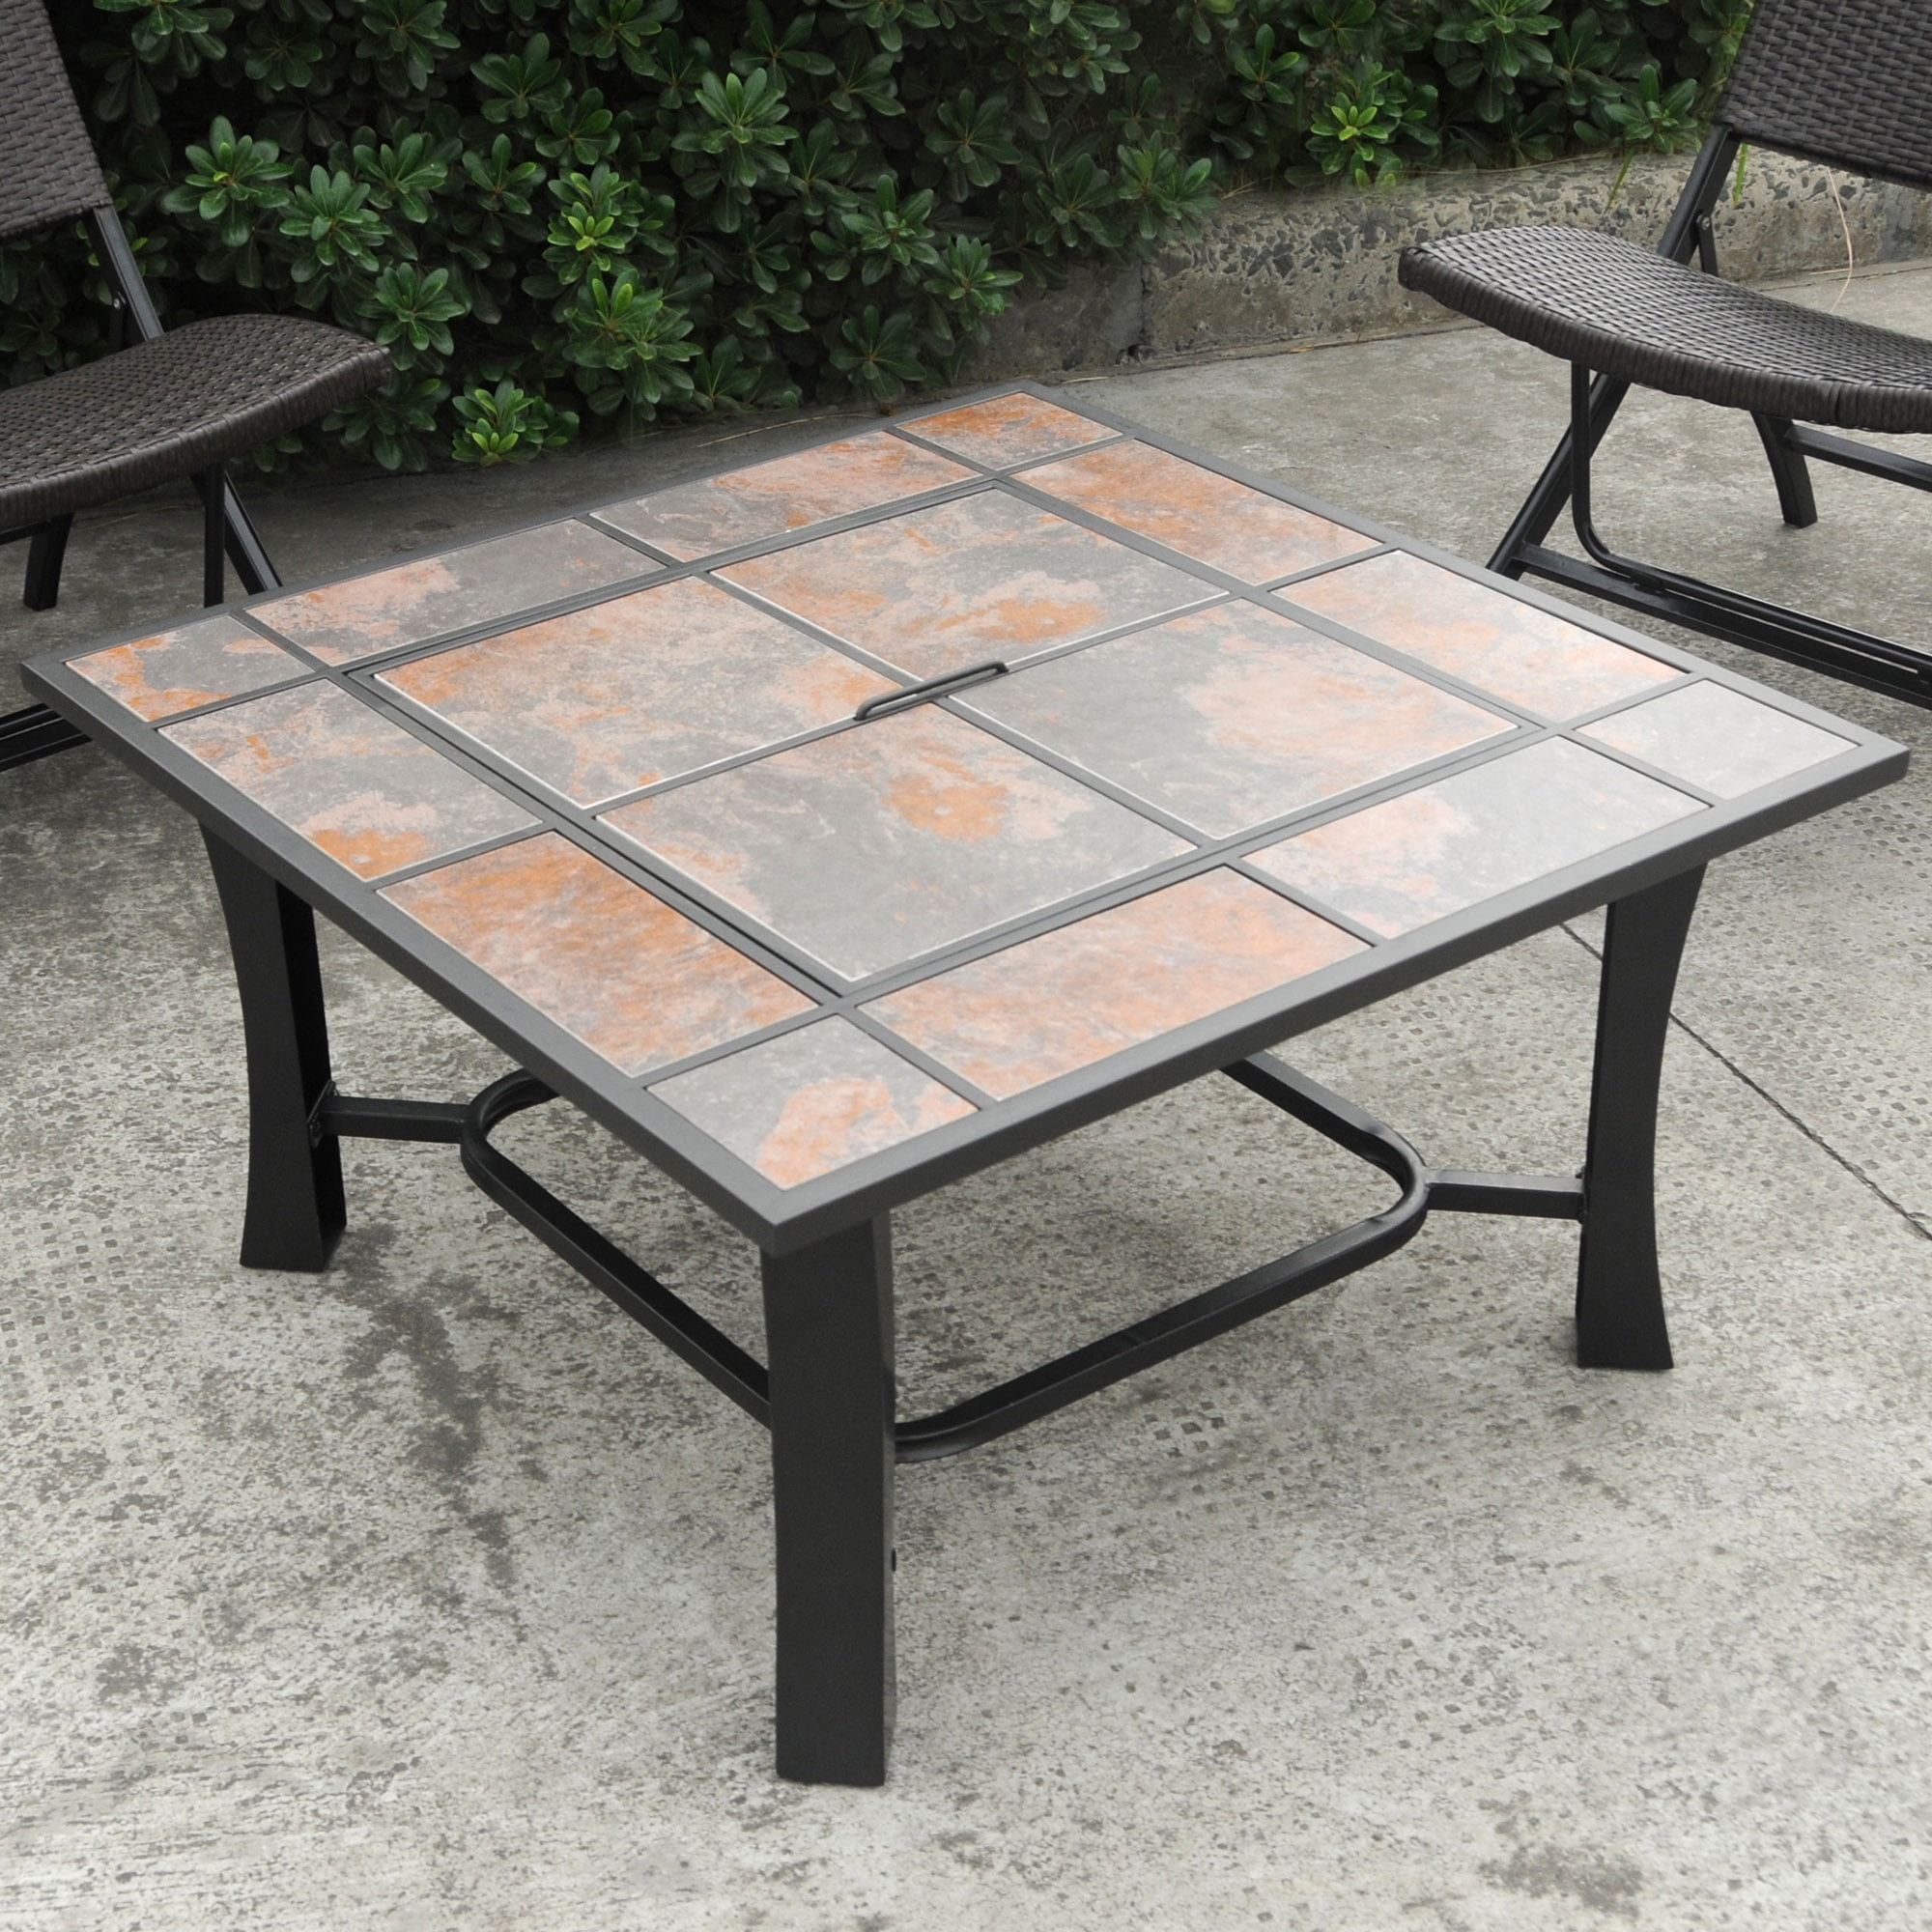 Details about   Patio Ceramic Tile Top Fire Pit Coffee Table Heater Fireplace Square Wood Burnin 